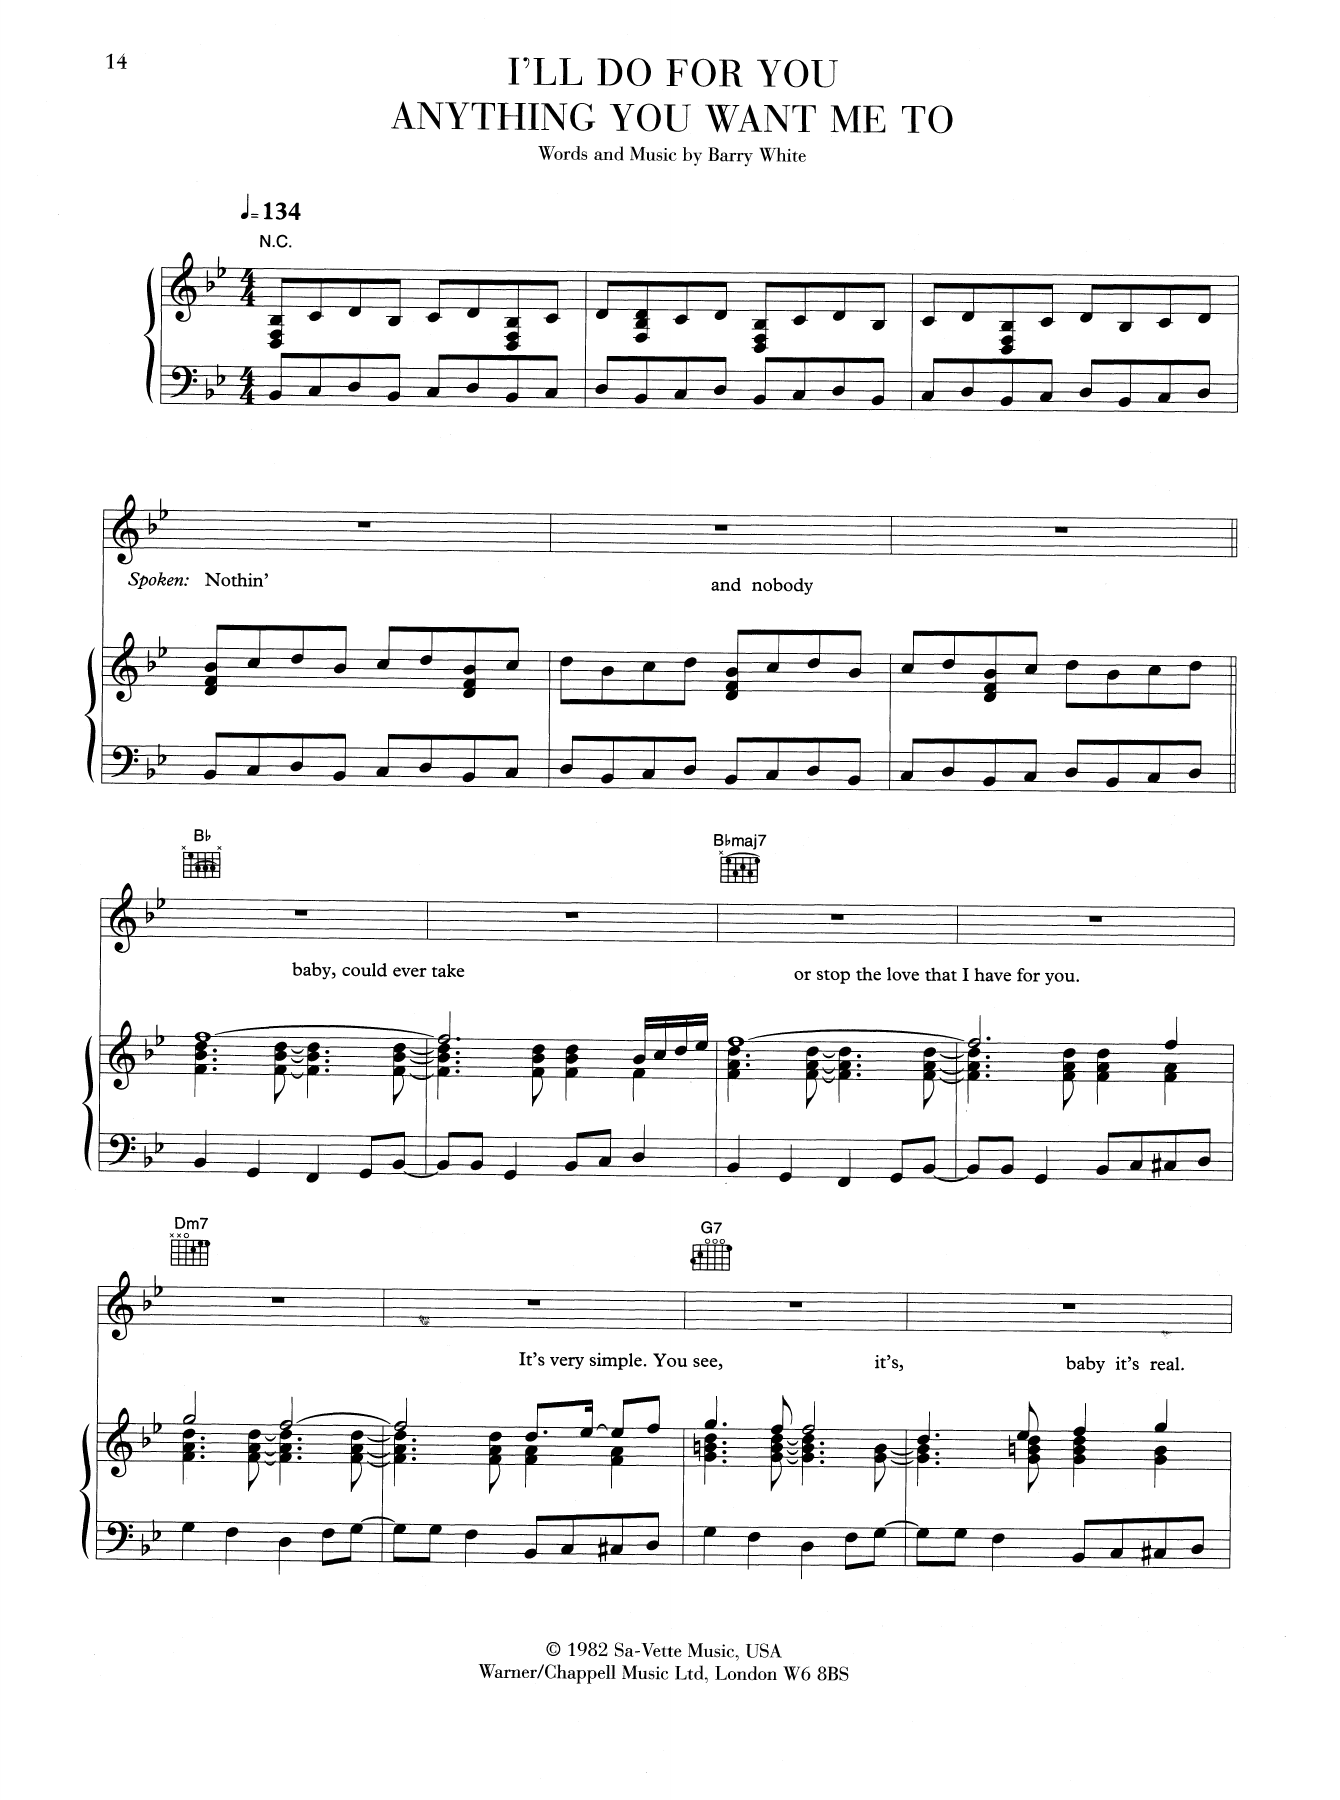 Download Barry White I'll Do Anything You Want Me To Sheet Music